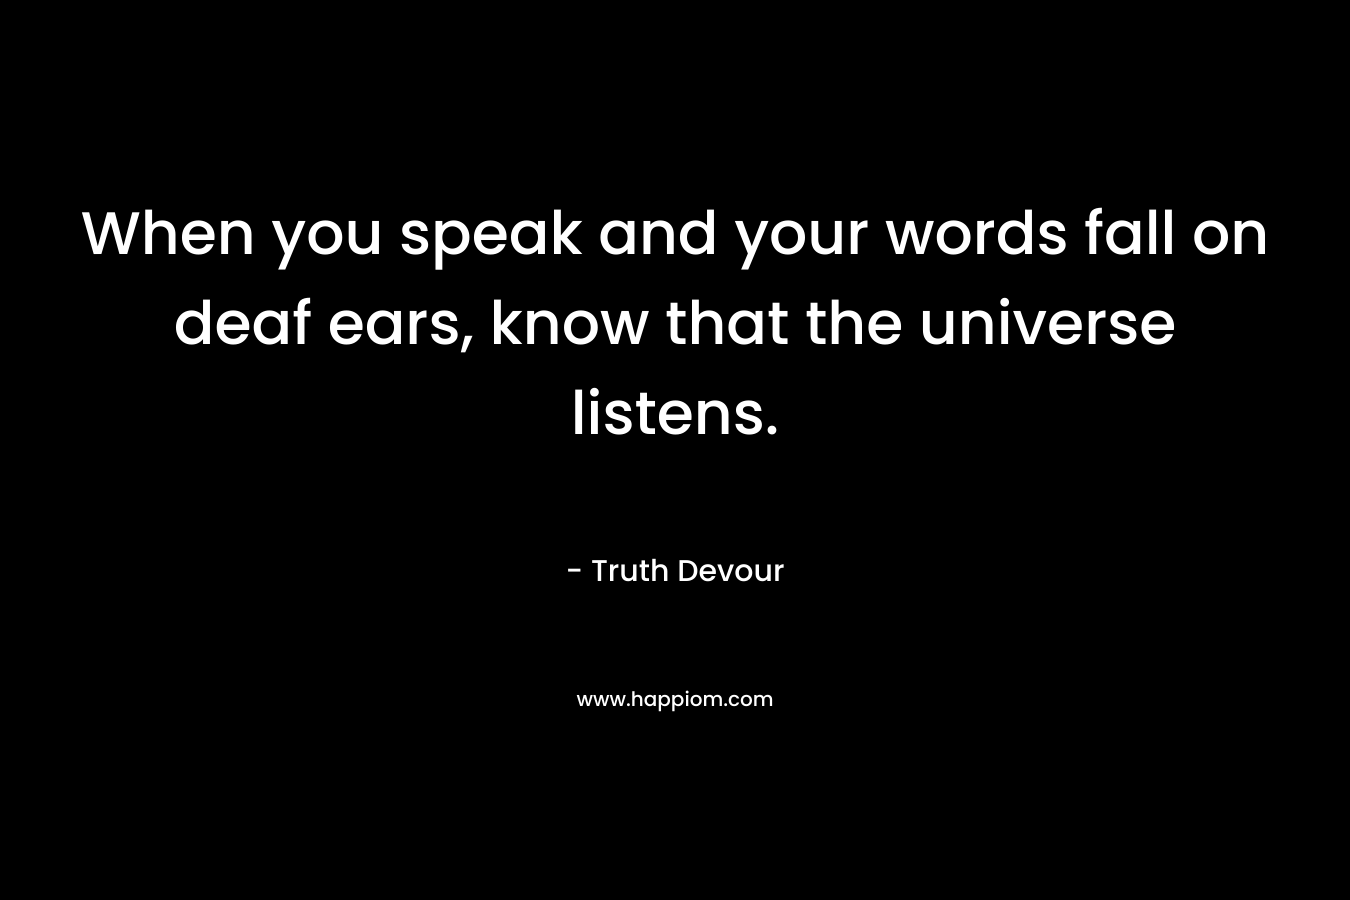 When you speak and your words fall on deaf ears, know that the universe listens. – Truth Devour